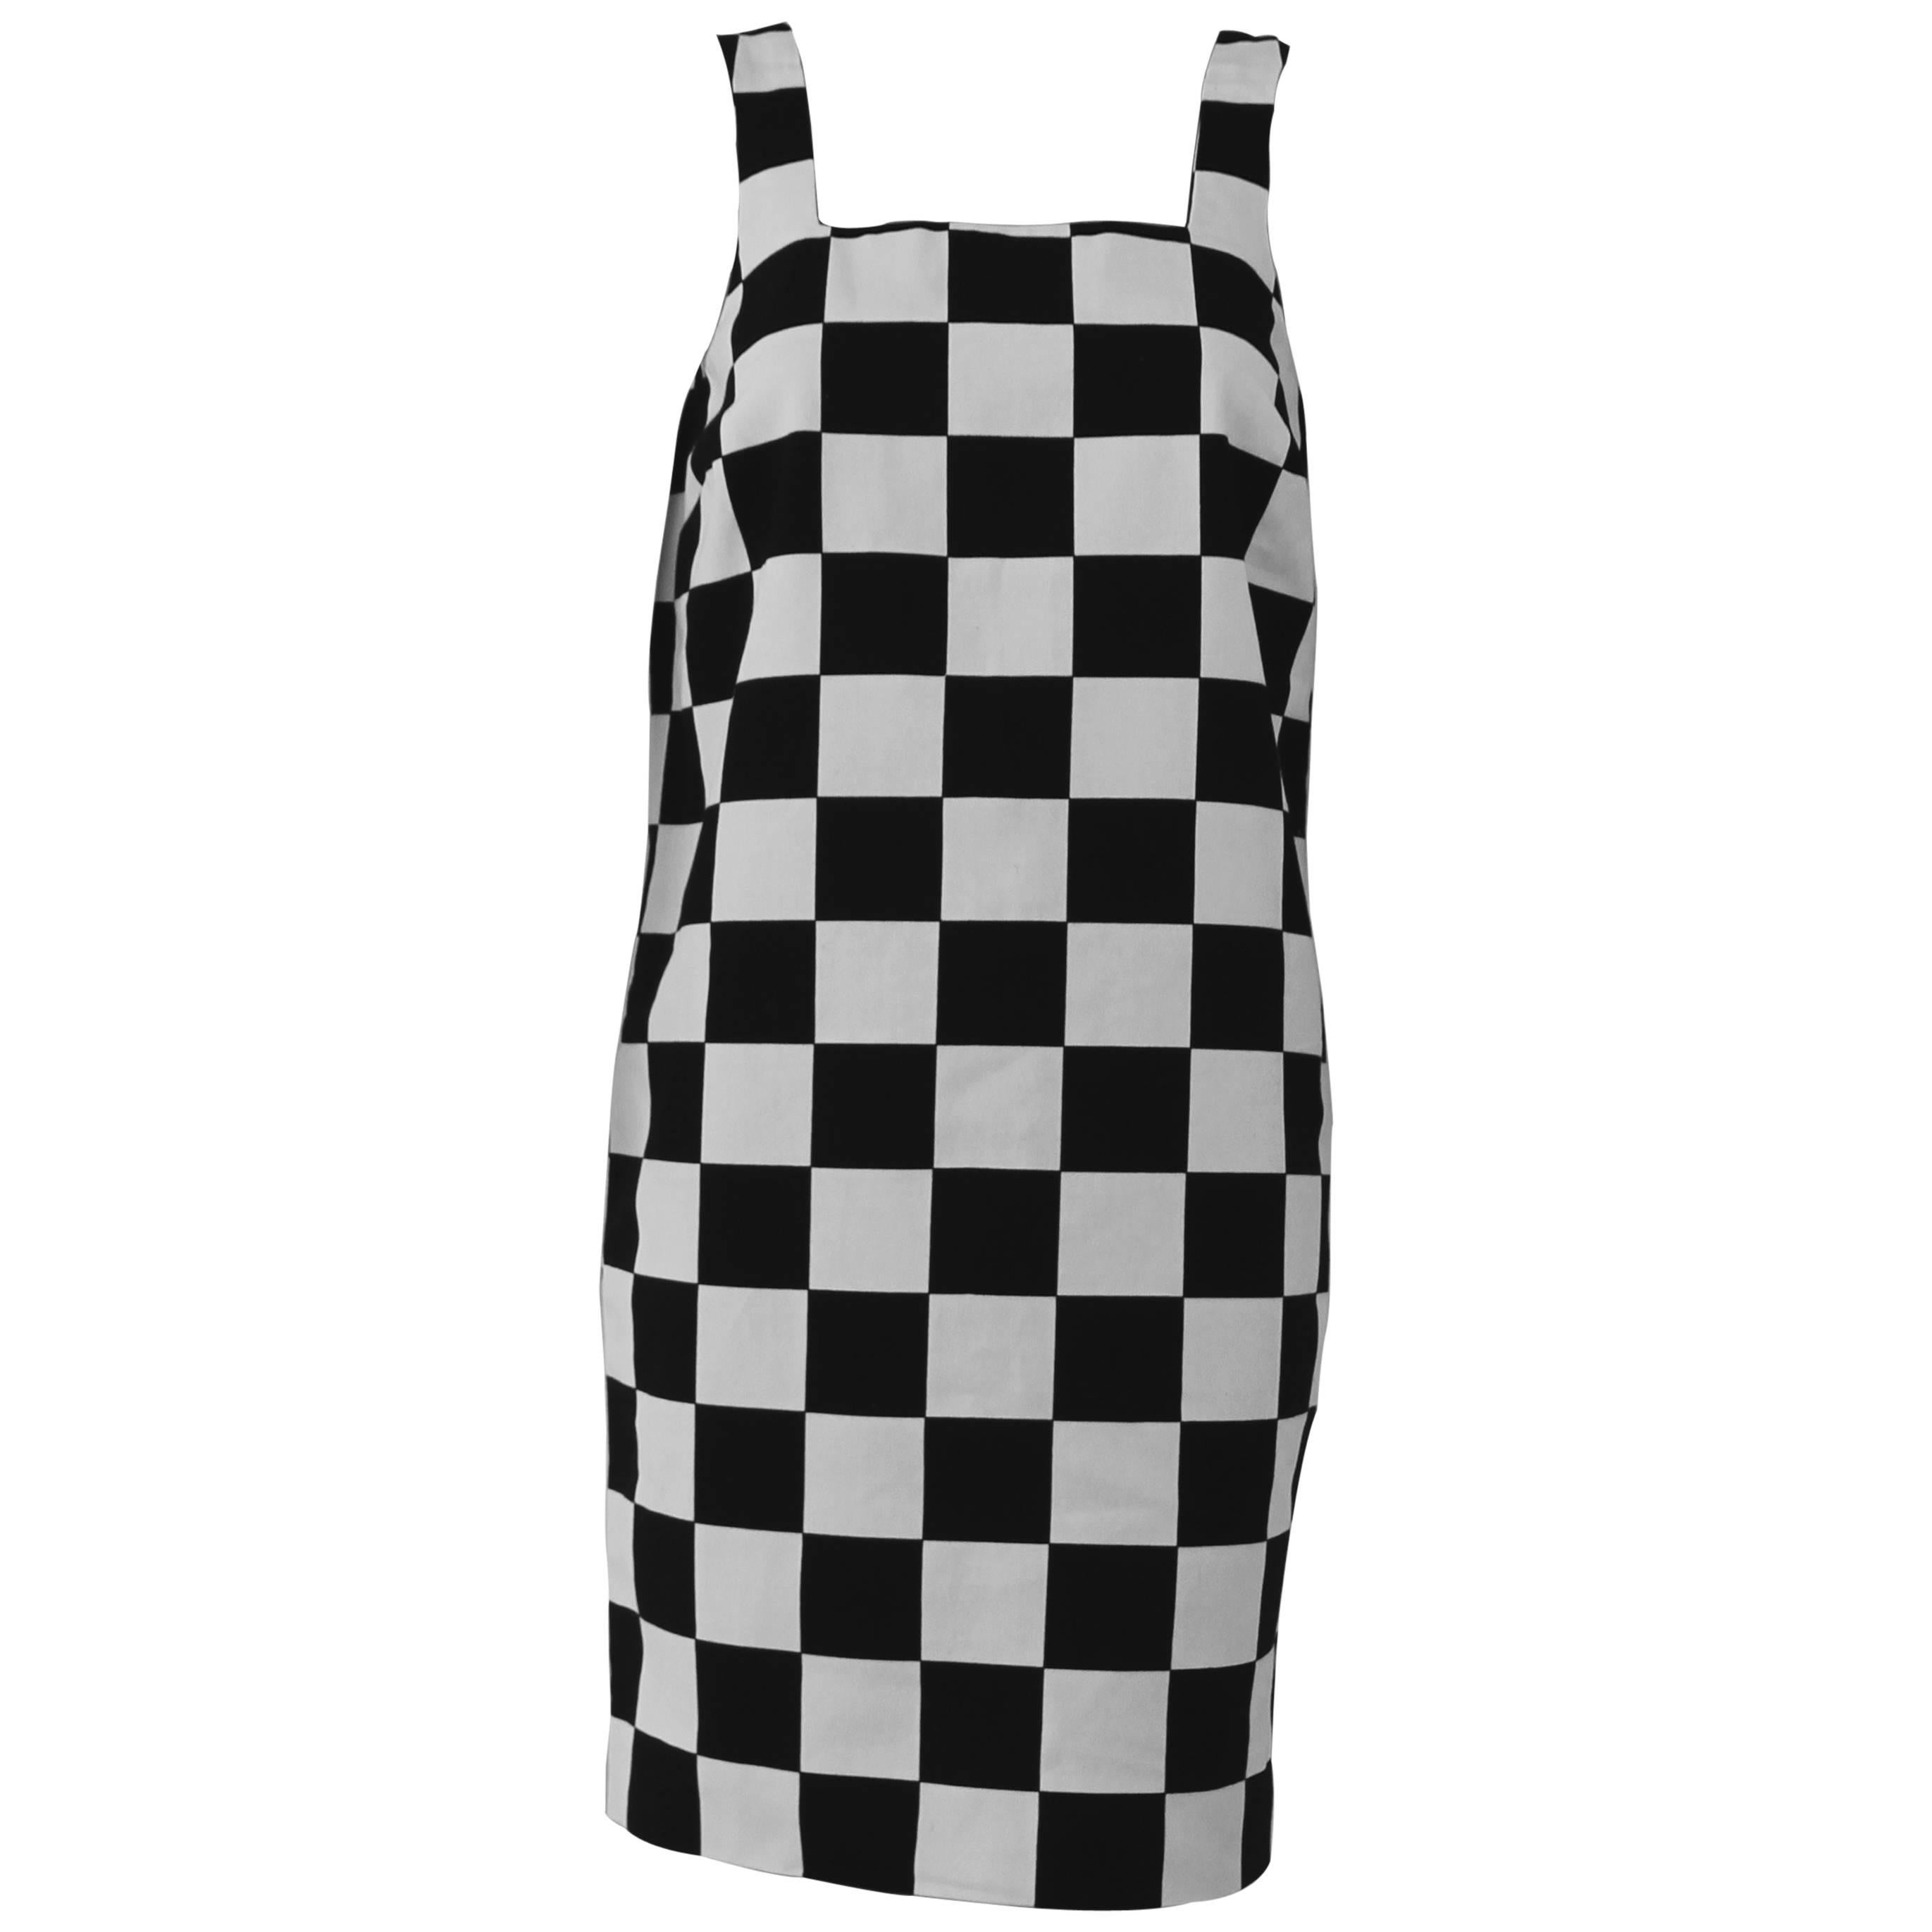 Gianni Versace Checkerboard Printed Shift Dress Spring 1995 For Sale